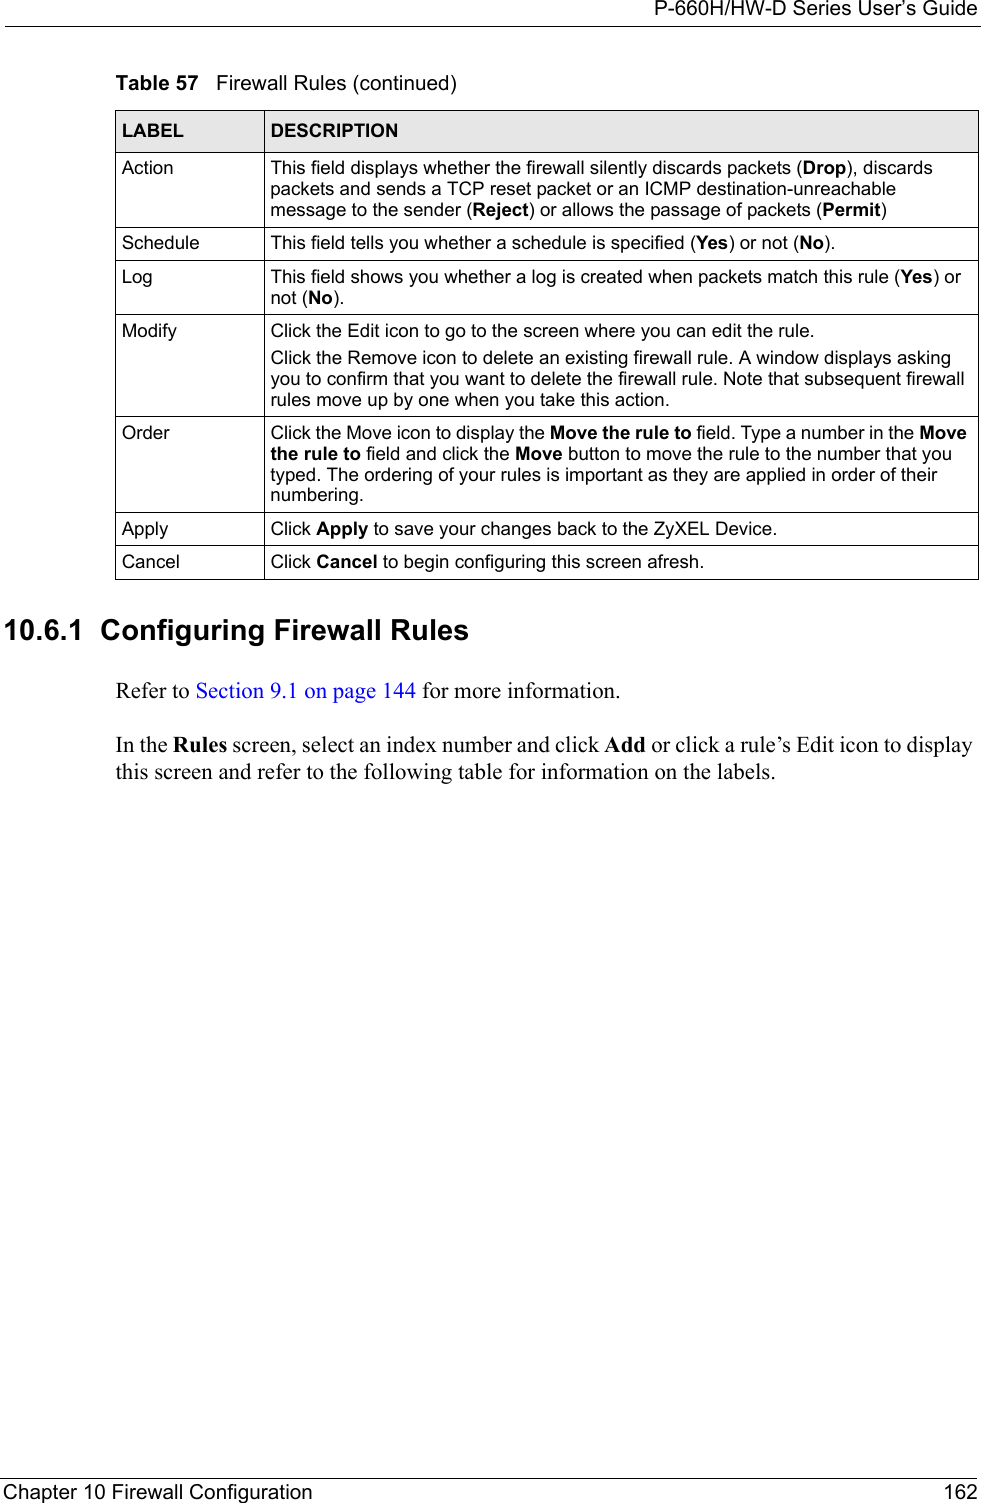 P-660H/HW-D Series User’s GuideChapter 10 Firewall Configuration 16210.6.1  Configuring Firewall Rules   Refer to Section 9.1 on page 144 for more information. In the Rules screen, select an index number and click Add or click a rule’s Edit icon to display this screen and refer to the following table for information on the labels.Action This field displays whether the firewall silently discards packets (Drop), discards packets and sends a TCP reset packet or an ICMP destination-unreachable message to the sender (Reject) or allows the passage of packets (Permit)Schedule This field tells you whether a schedule is specified (Yes) or not (No).Log This field shows you whether a log is created when packets match this rule (Yes) or not (No).Modify Click the Edit icon to go to the screen where you can edit the rule.Click the Remove icon to delete an existing firewall rule. A window displays asking you to confirm that you want to delete the firewall rule. Note that subsequent firewall rules move up by one when you take this action.Order Click the Move icon to display the Move the rule to field. Type a number in the Move the rule to field and click the Move button to move the rule to the number that you typed. The ordering of your rules is important as they are applied in order of their numbering.Apply Click Apply to save your changes back to the ZyXEL Device.Cancel Click Cancel to begin configuring this screen afresh.Table 57   Firewall Rules (continued)LABEL DESCRIPTION